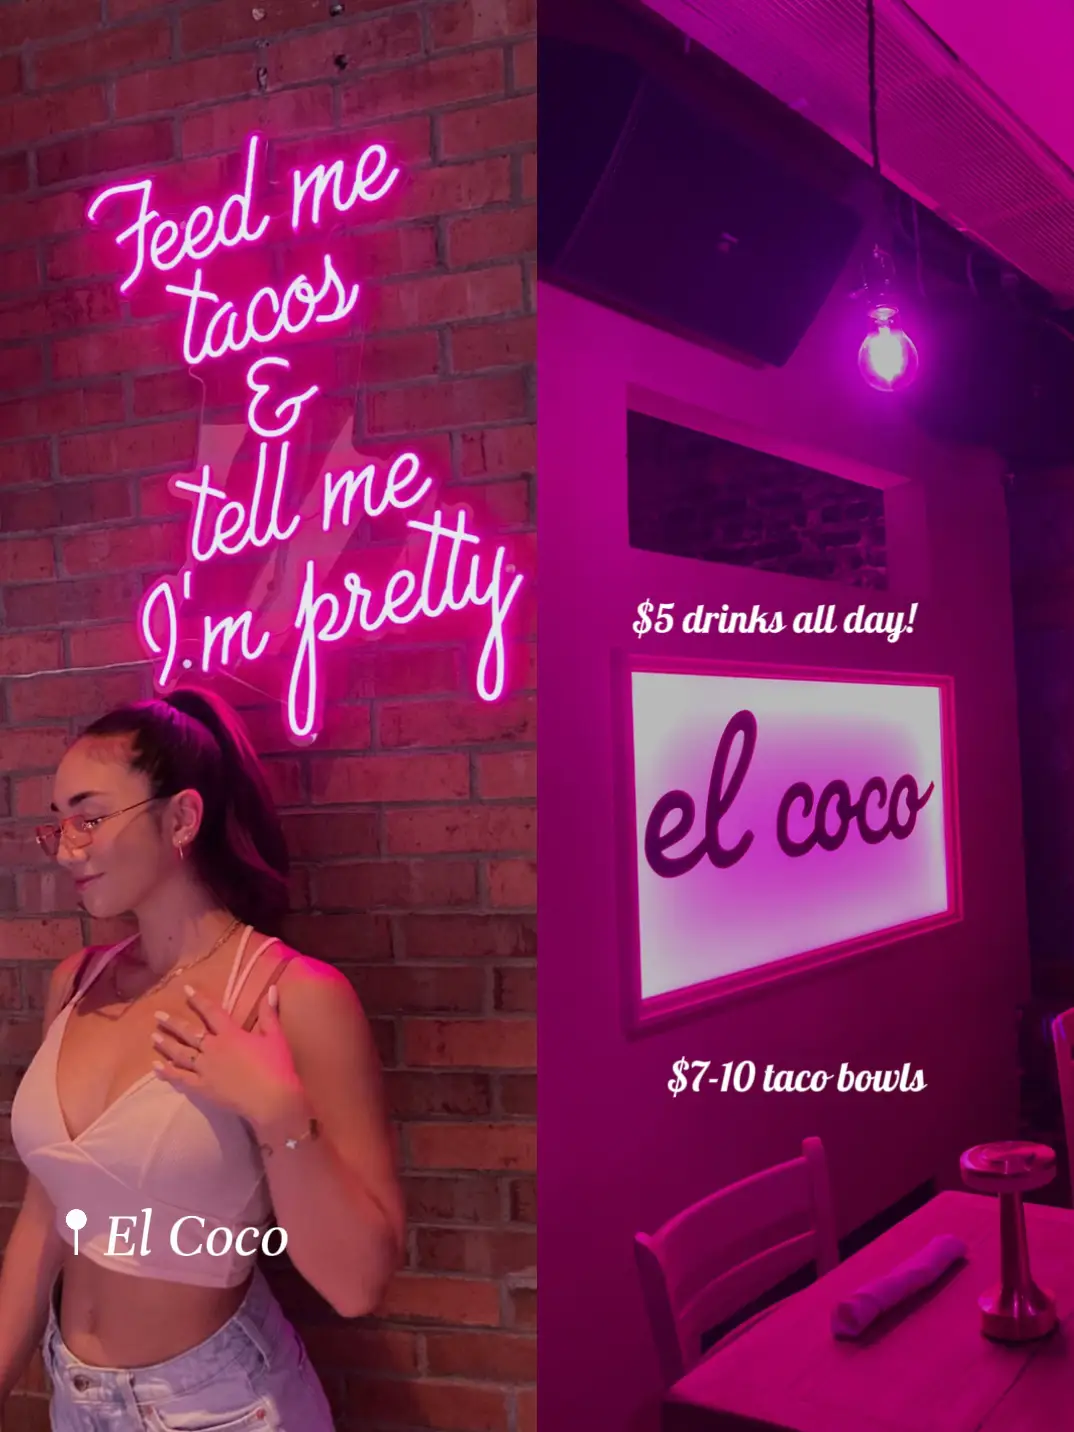  A woman is standing in front of a brick wall with a sign that says "El Coco". She is wearing a black shirt and jeans and is